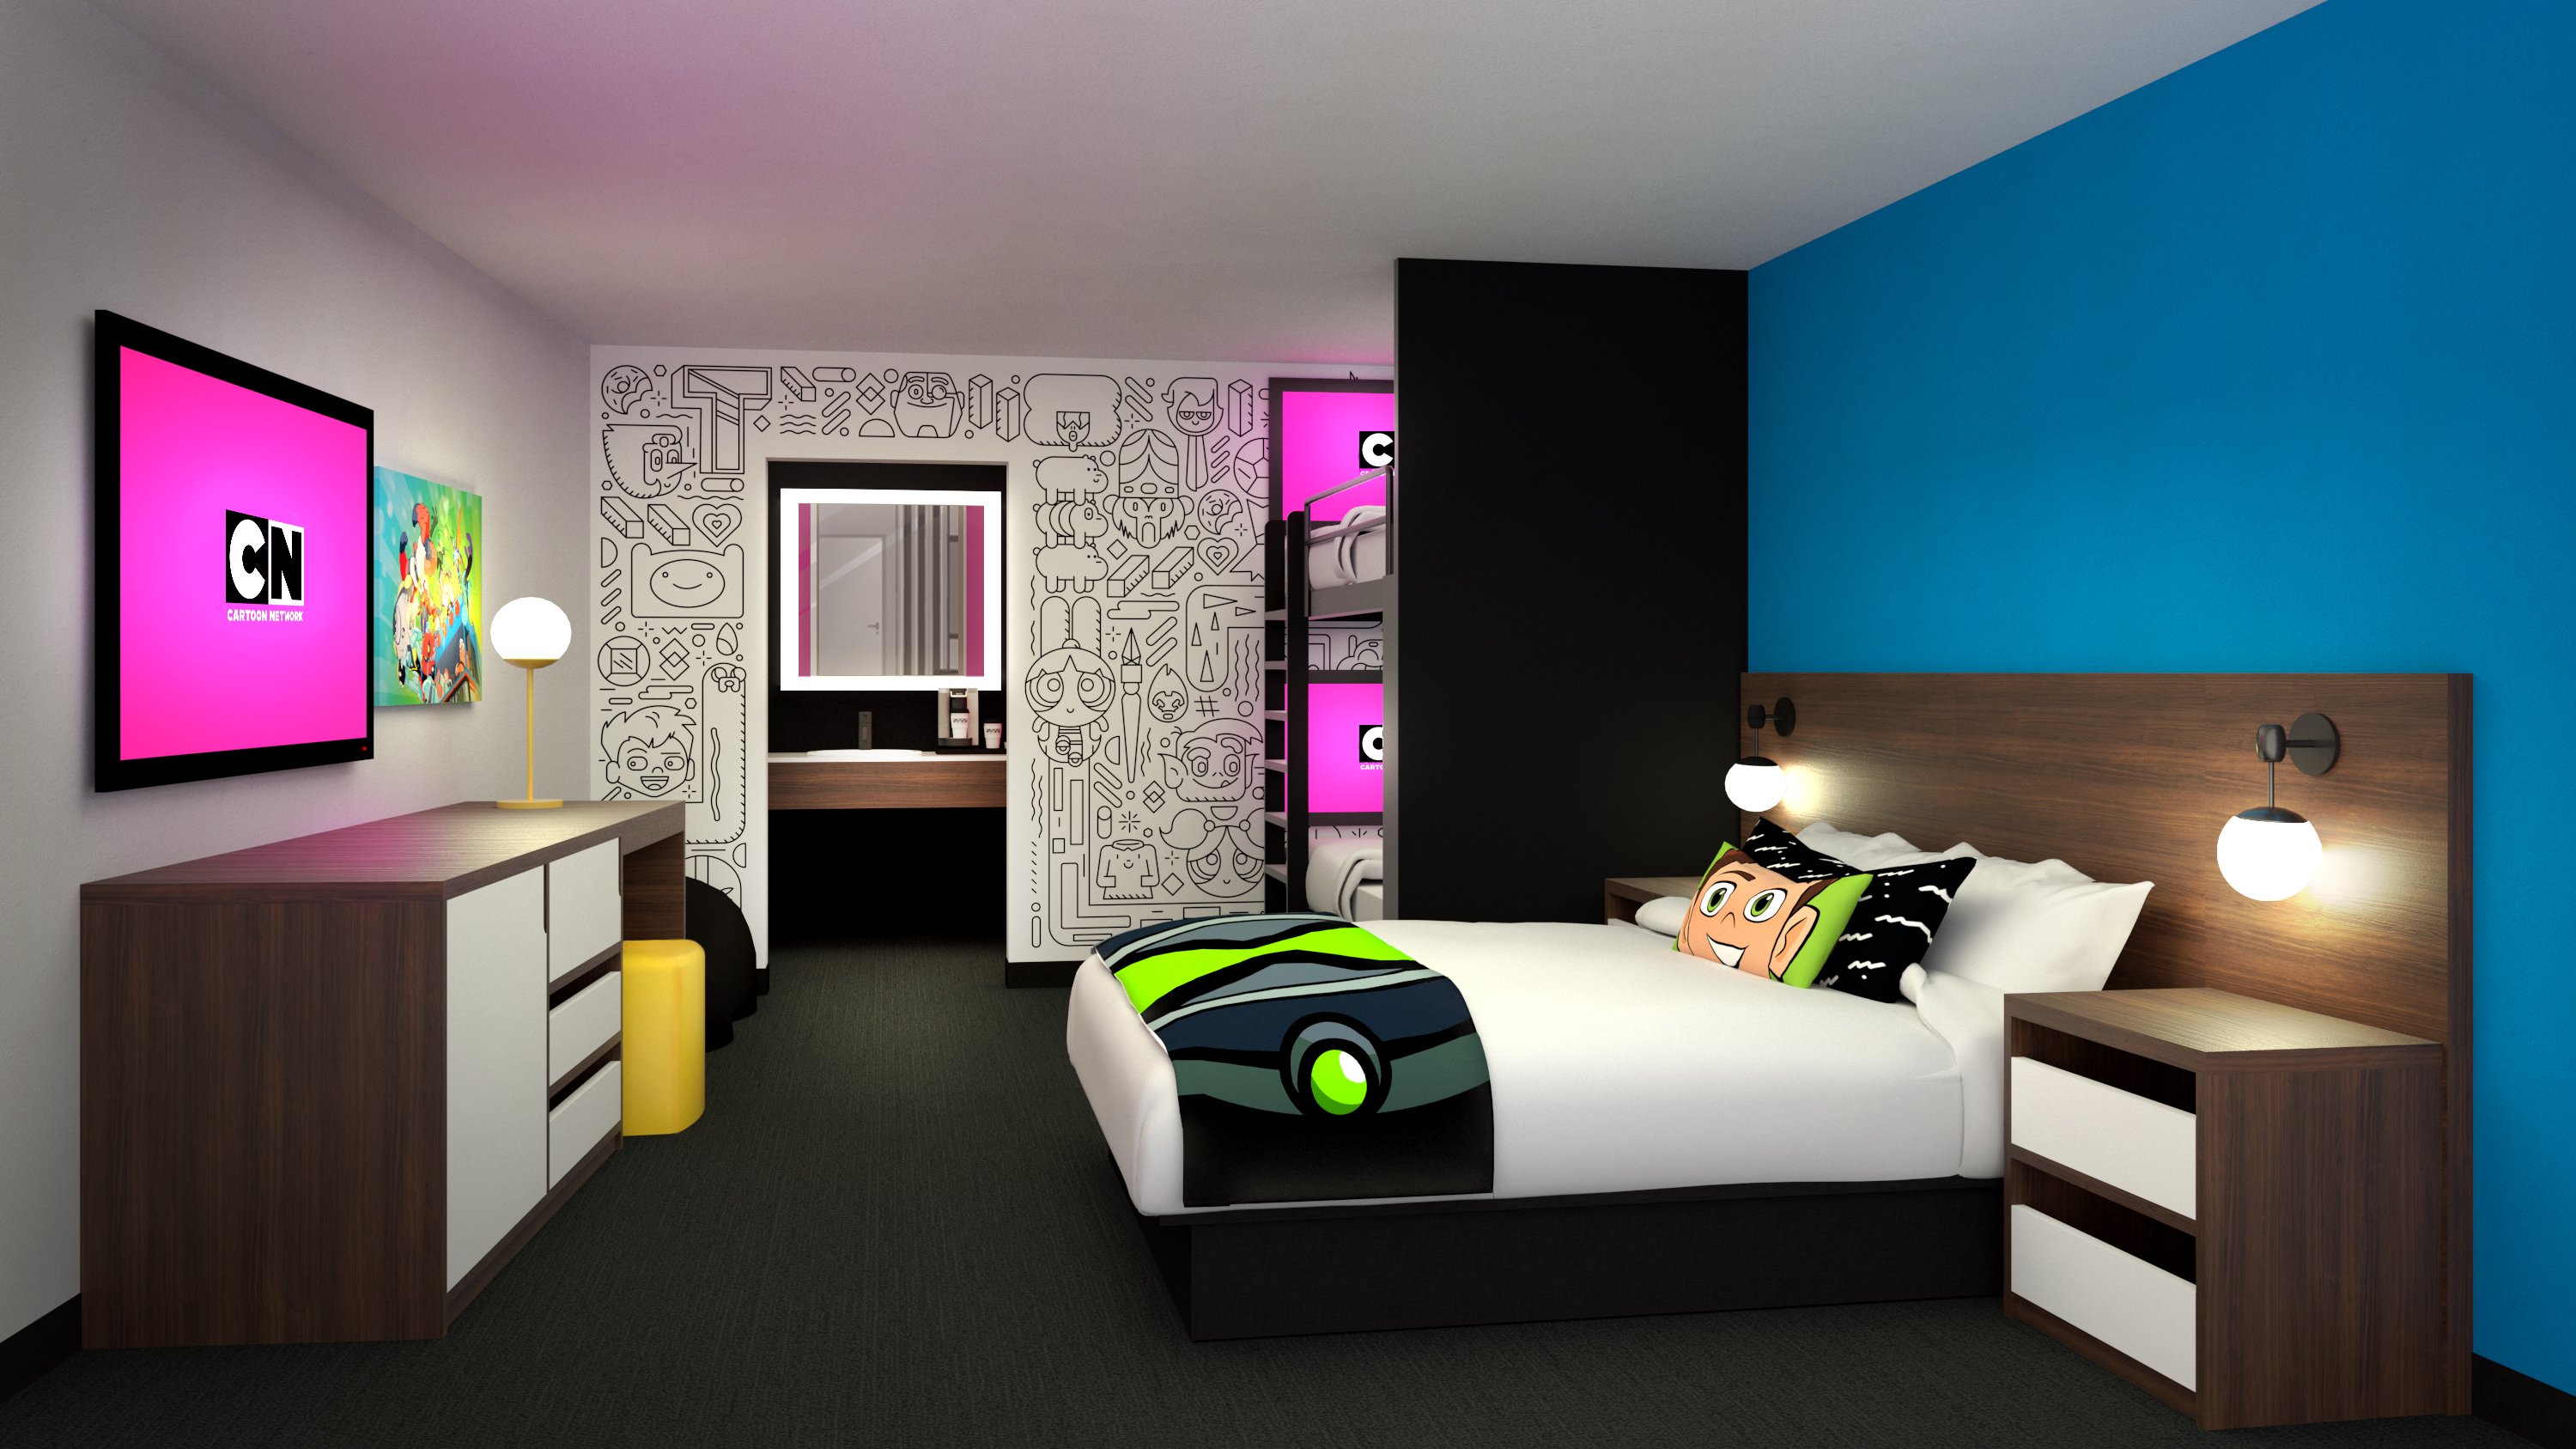 Cartoon Network Hotel - Starting Monday morning off right. What's it like  to wake up in one of our Dream Suites? #EatSleepCartoon #DreamSuites